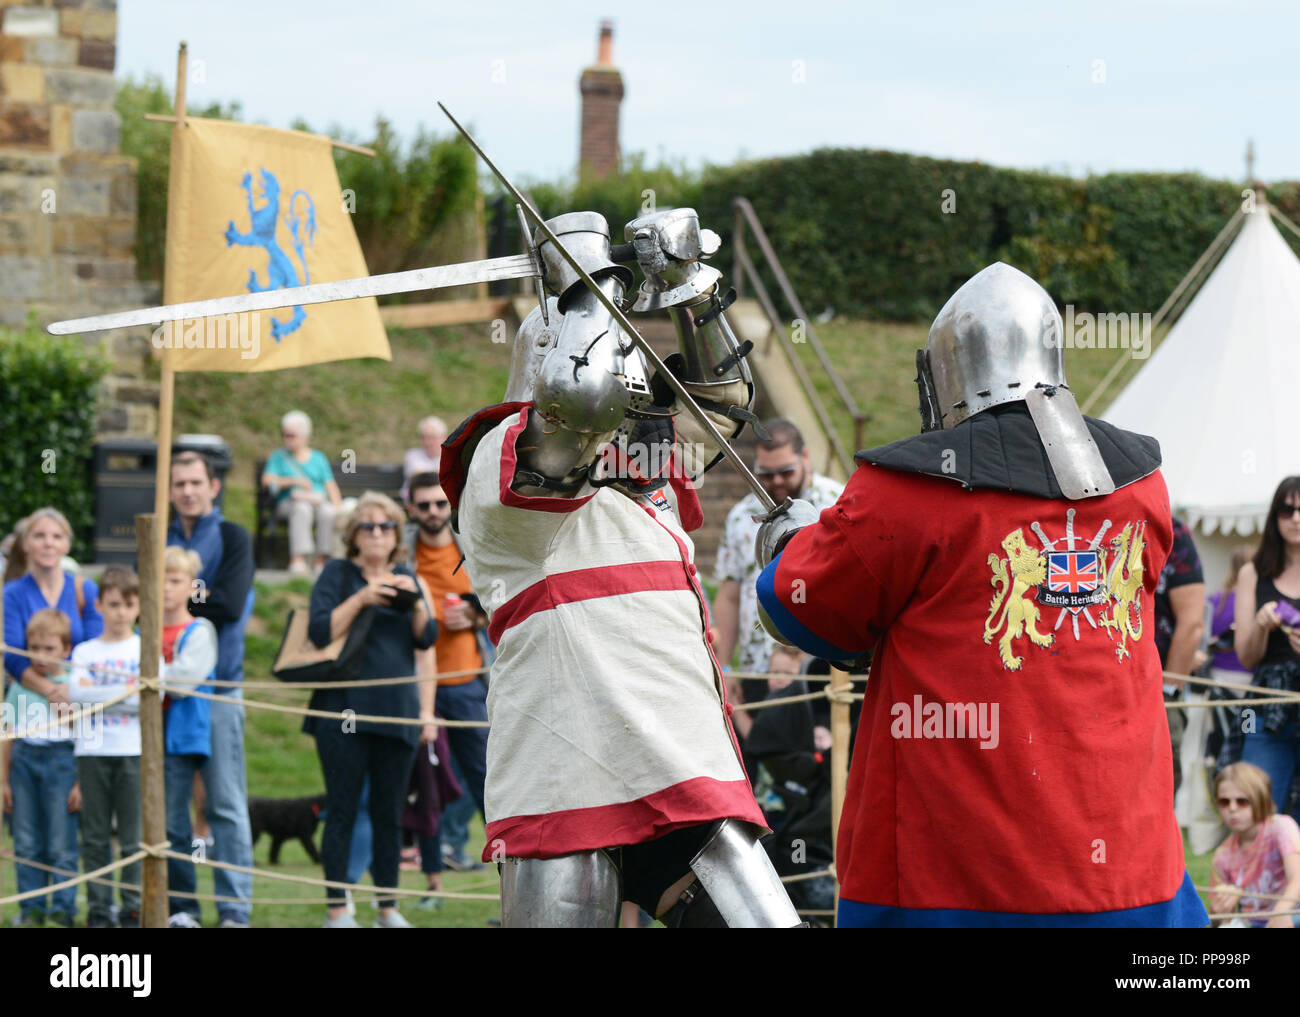 TONBRIDGE, ENGLAND - SEPTEMBER 9, 2018: Two knights in medieval battle dress fight with swords at the Medieval Fair at Tonbridge Castle Stock Photo